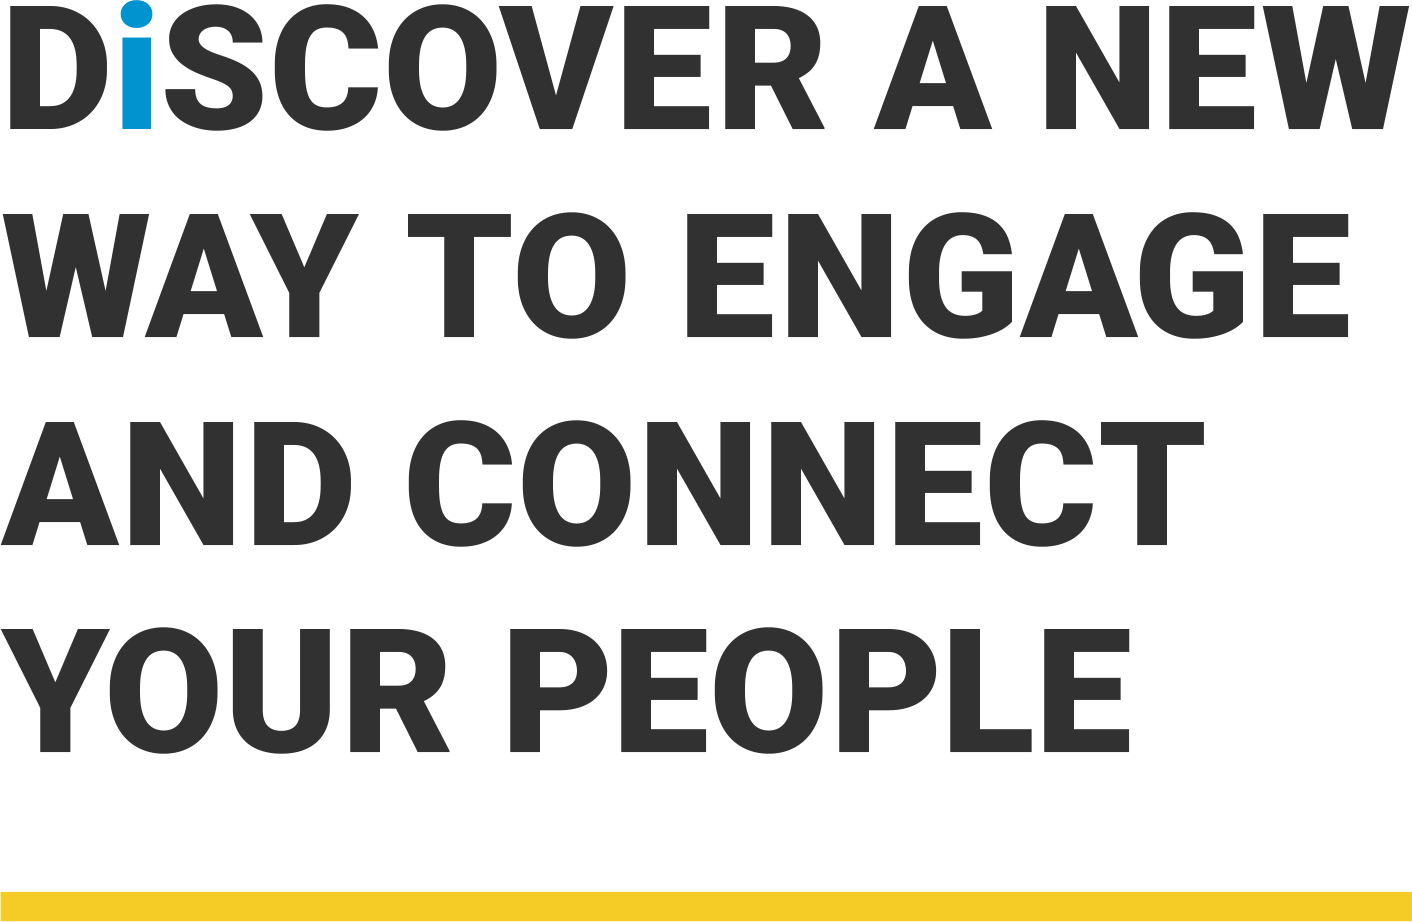 DiSCover a new way to engage and connect your people